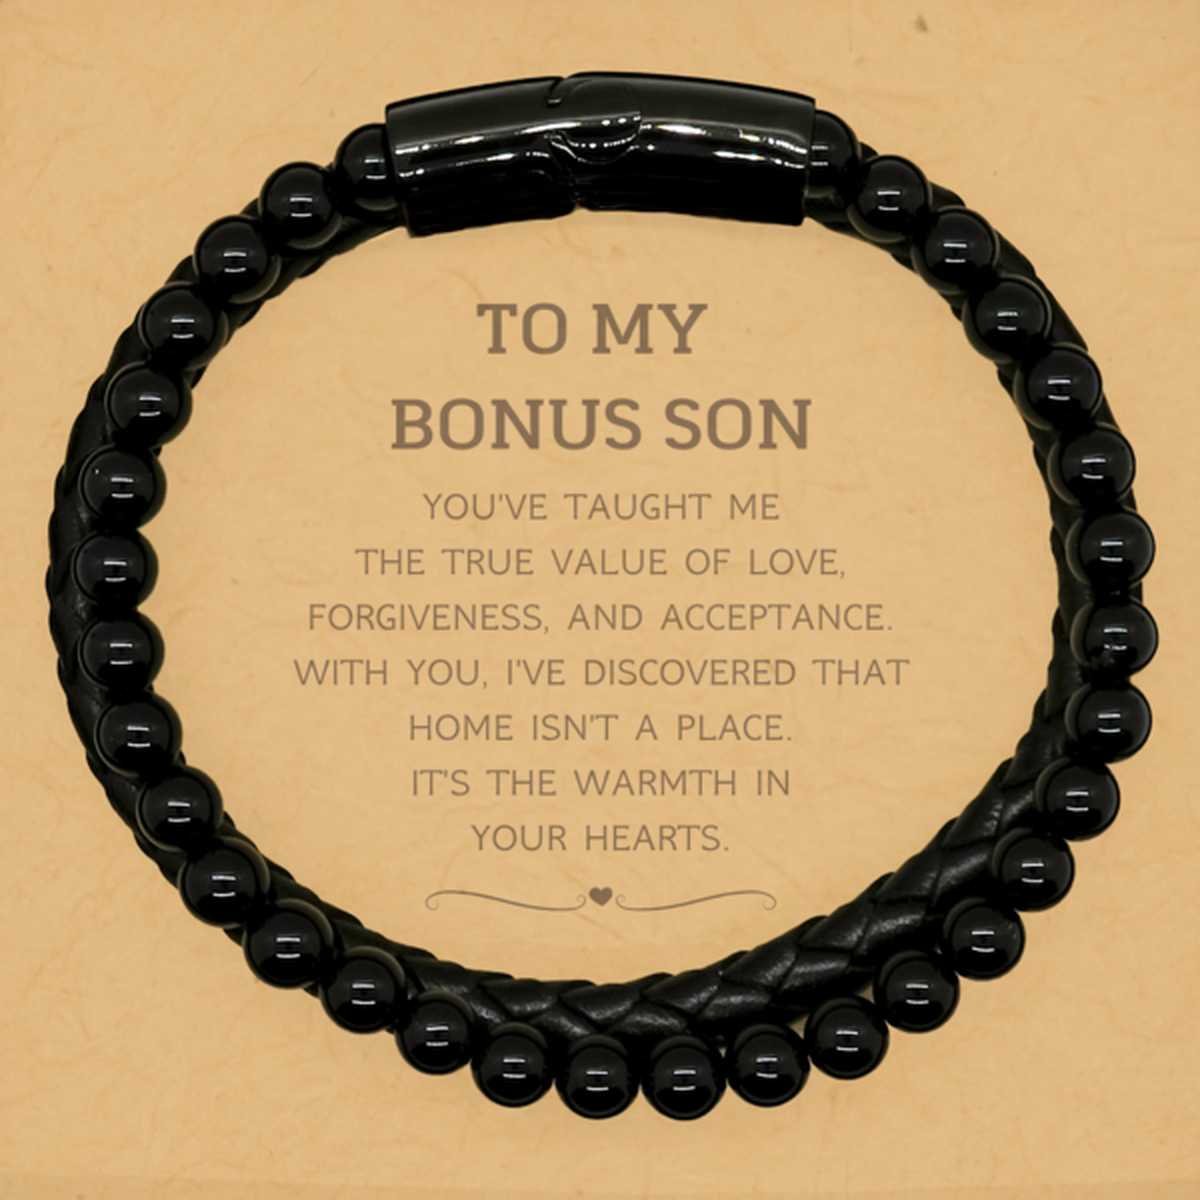 To My Bonus Son Gifts, You've taught me the true value of love, Thank You Gifts For Bonus Son, Birthday Stone Leather Bracelets For Bonus Son